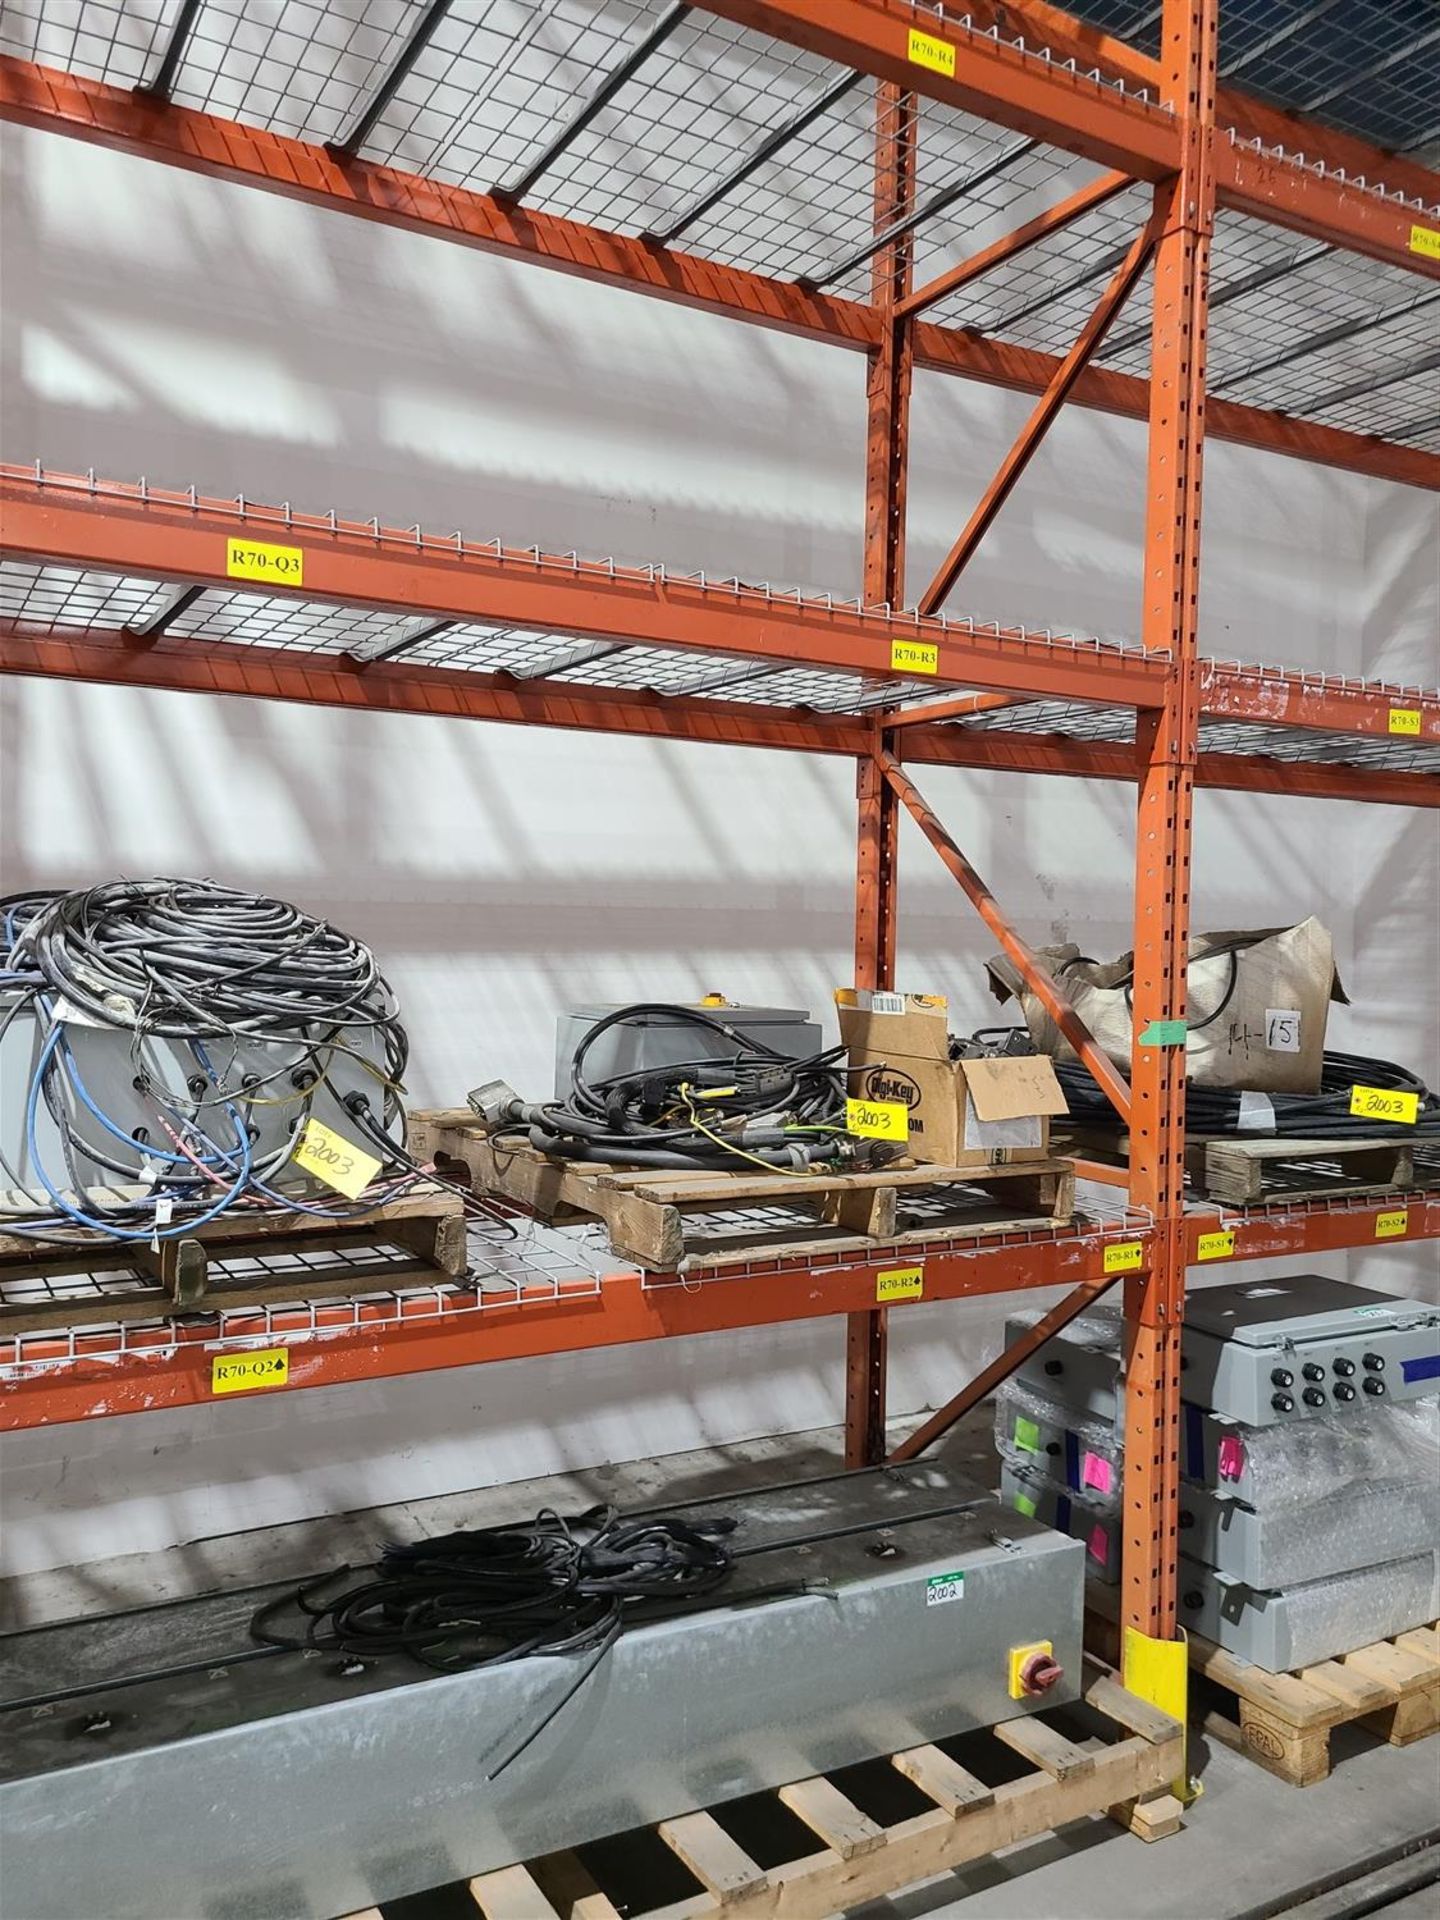 3 PALLETS OF 2 ELECTRICAL BOXES WIRE ETC.